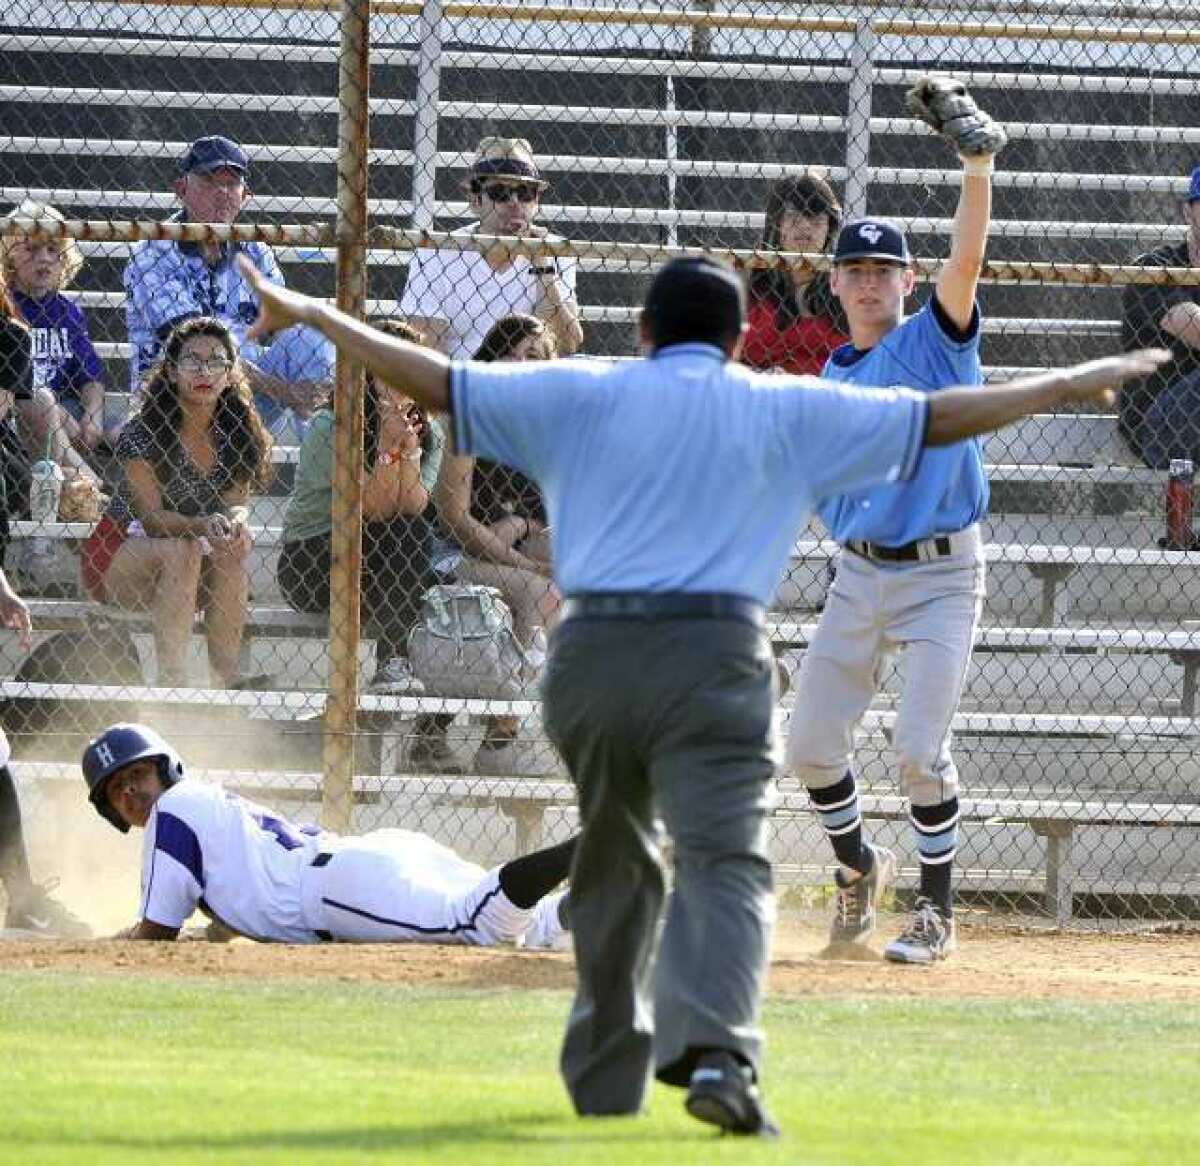 Crescenta Valley third baseman Joe Torres, right, holds up the ball to show the umpire he had it, but the umpire called Hoover runner Luis Zamora safe at third.